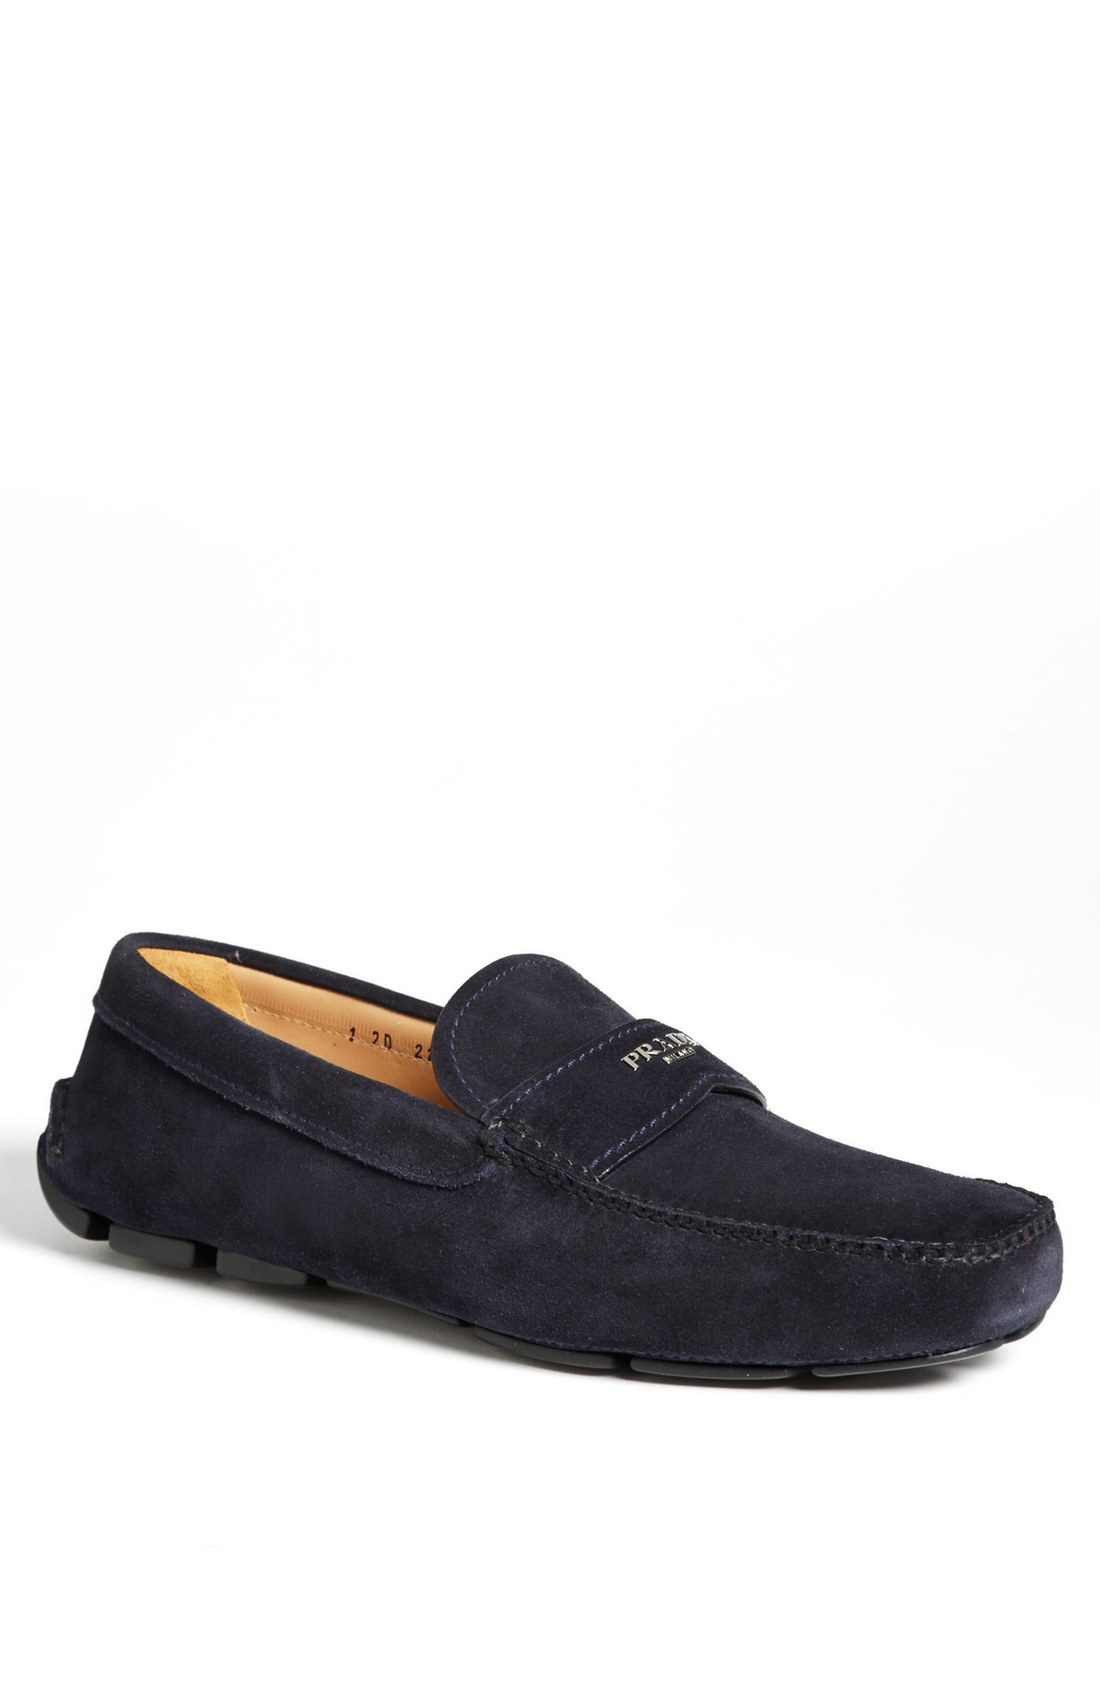 Prada Suede Driving Shoe in Blue for Men (Blue Suede) | Lyst